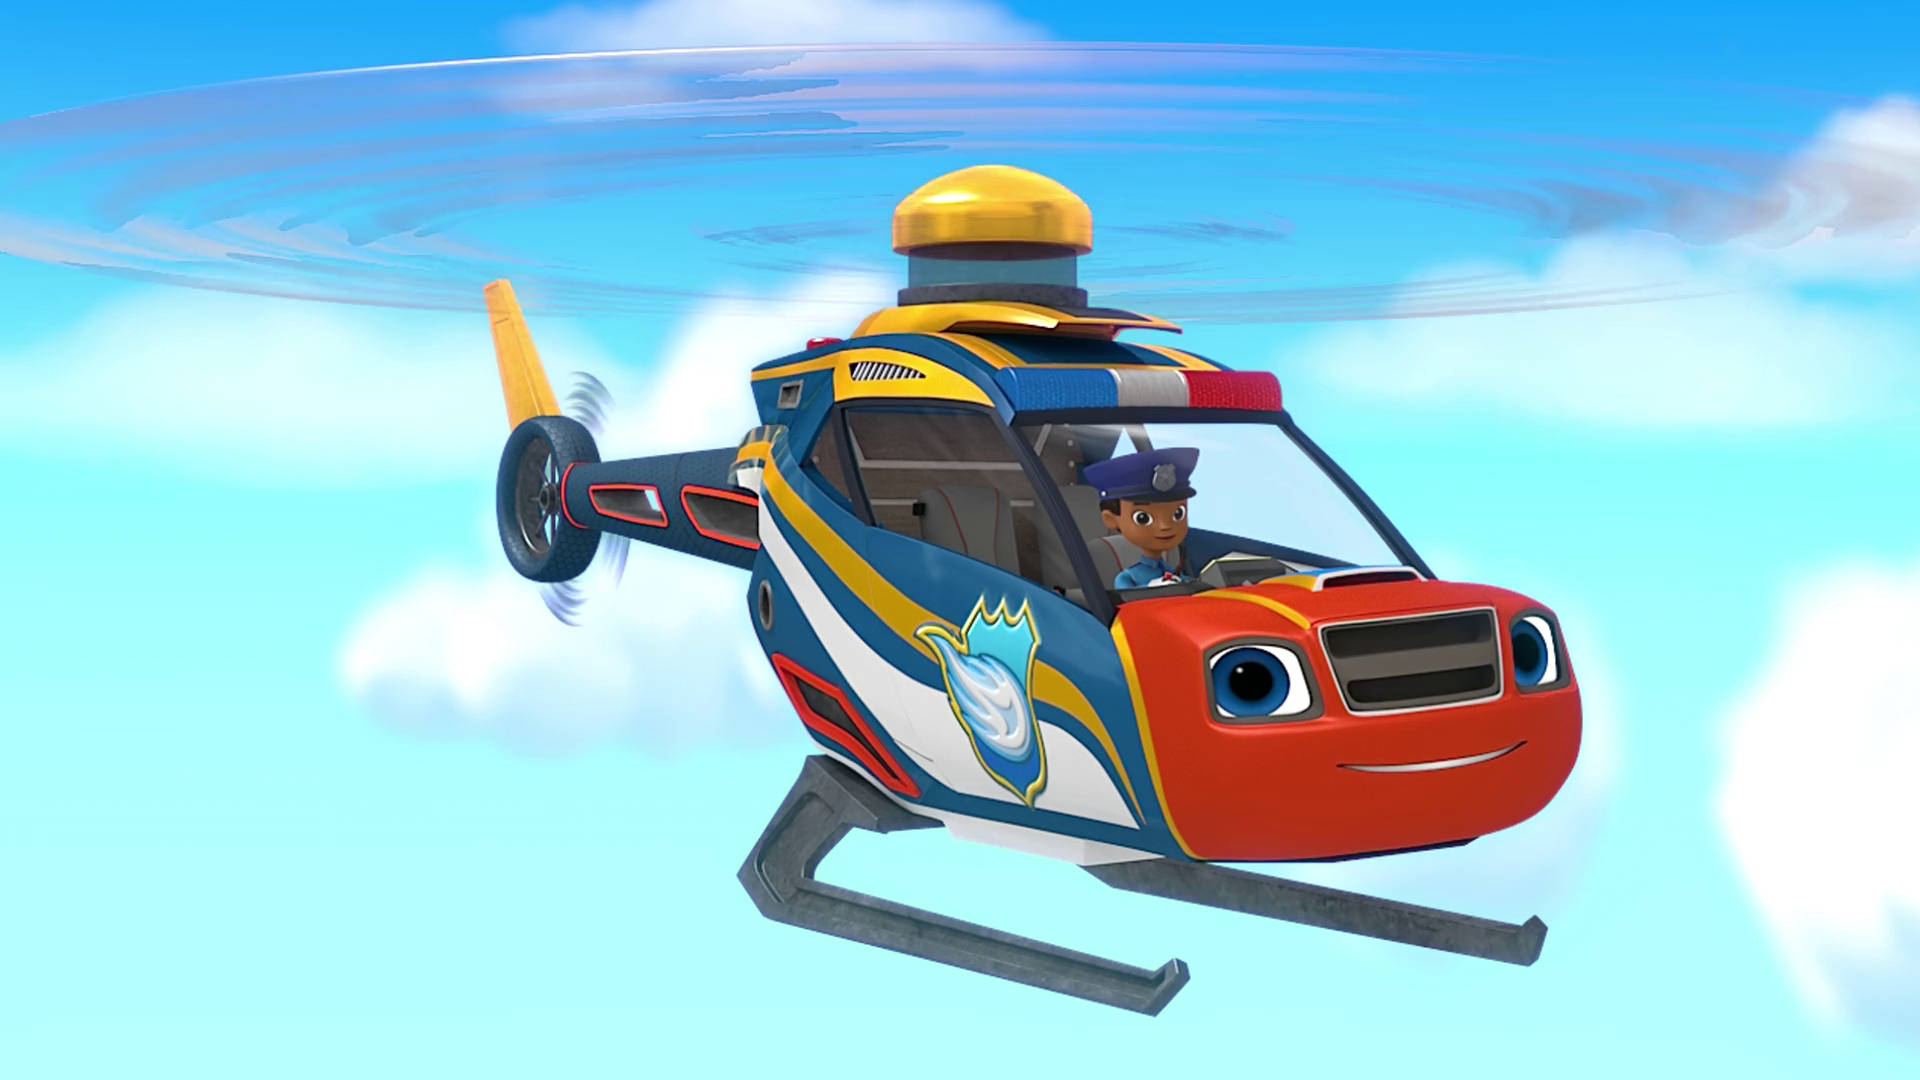 Blaze And The Monster Machines Helicopter Background